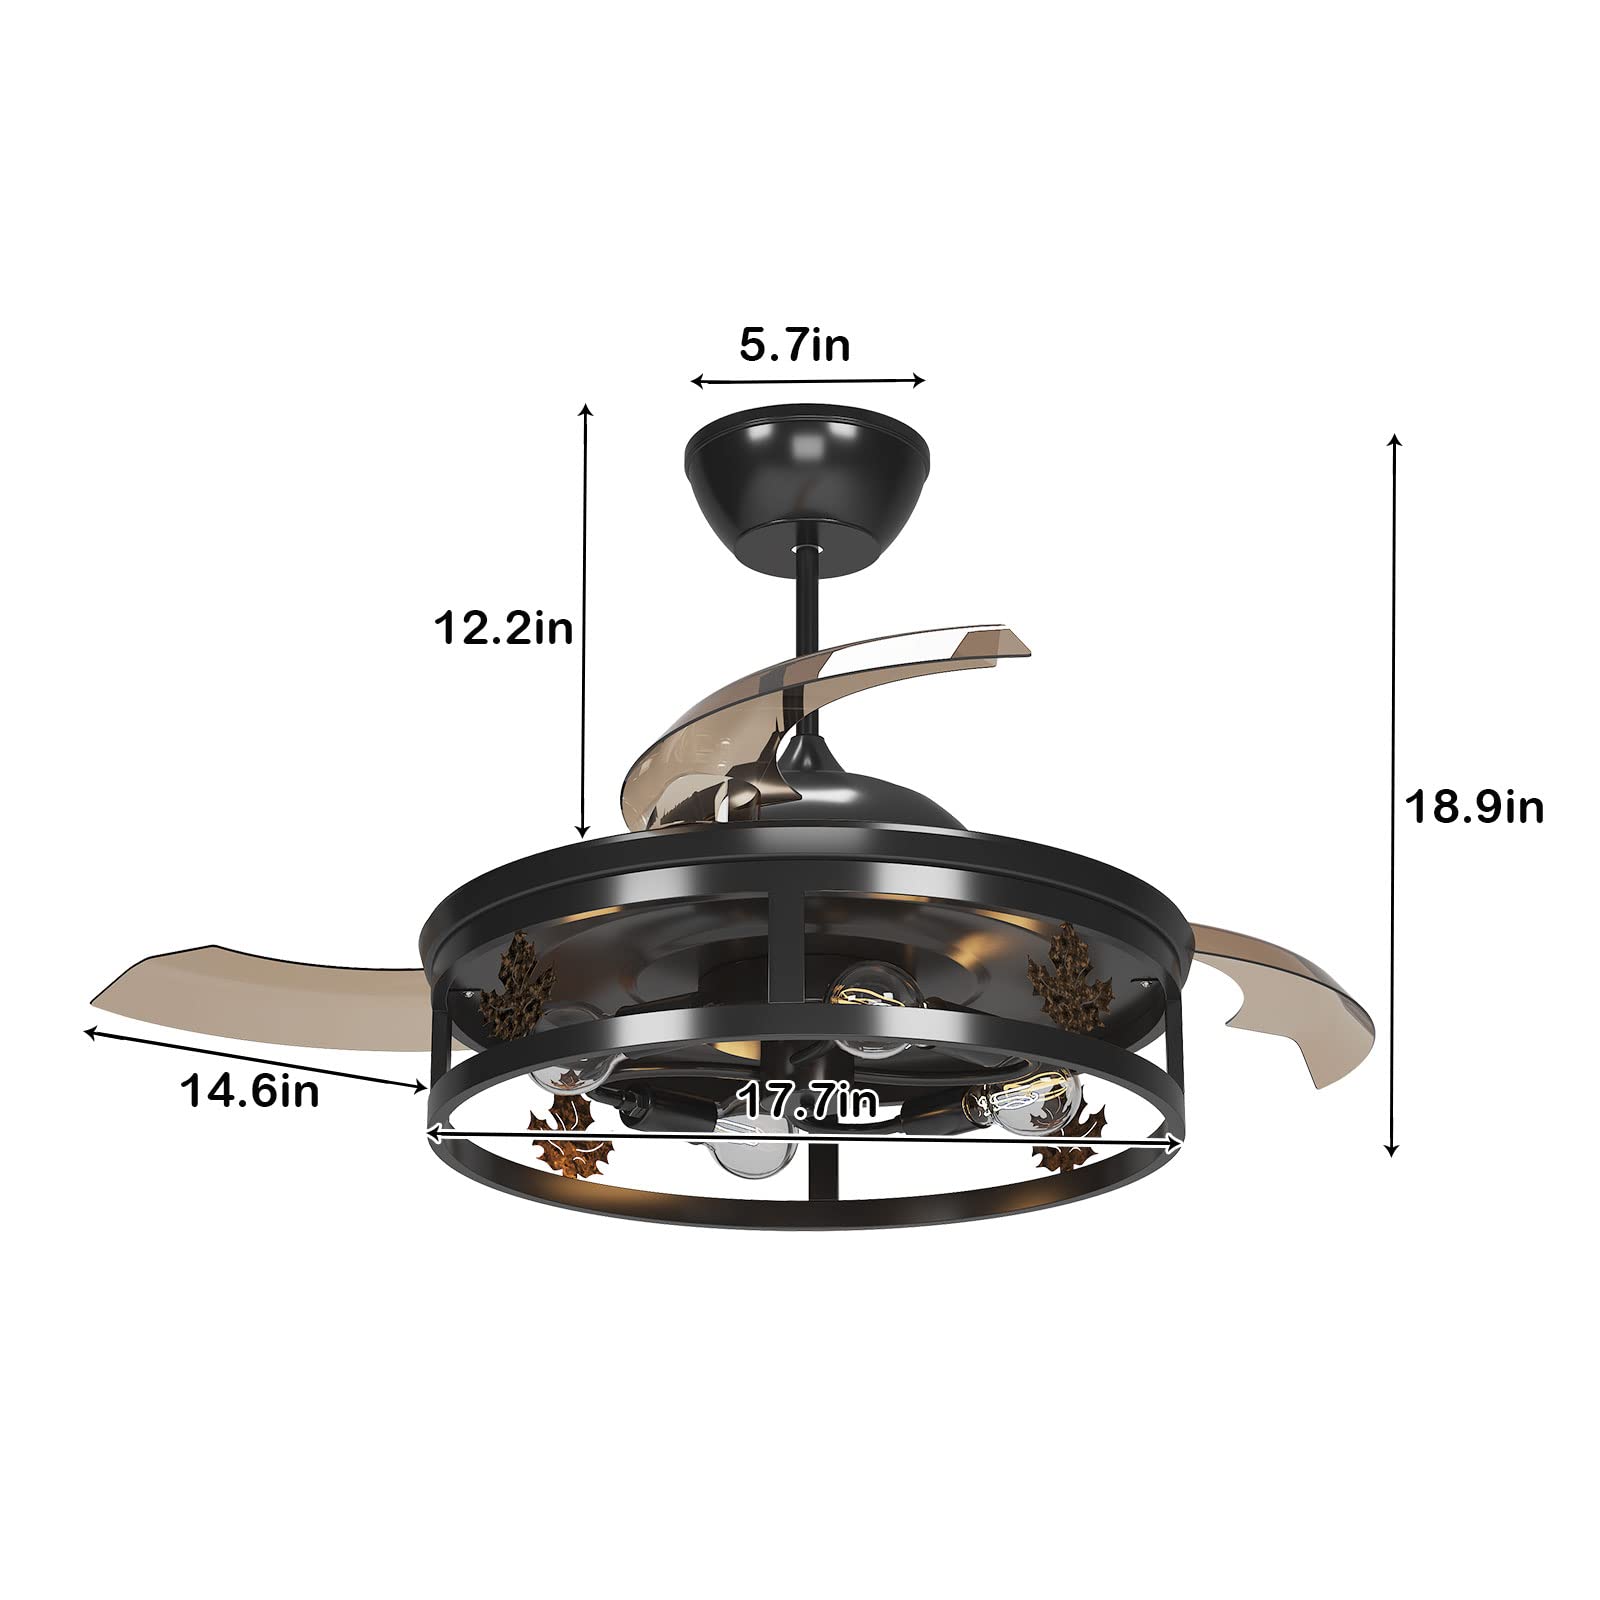 soges Caged Ceiling Fan with Lights & Remote Control, Industrial Black Ceiling Fan with Hidden 3 Reversible Blades, 6 Speeds Wind Adjustable, 1/2/4 H Timer, for Bedroom Kitchen Living Room (No Bulb)